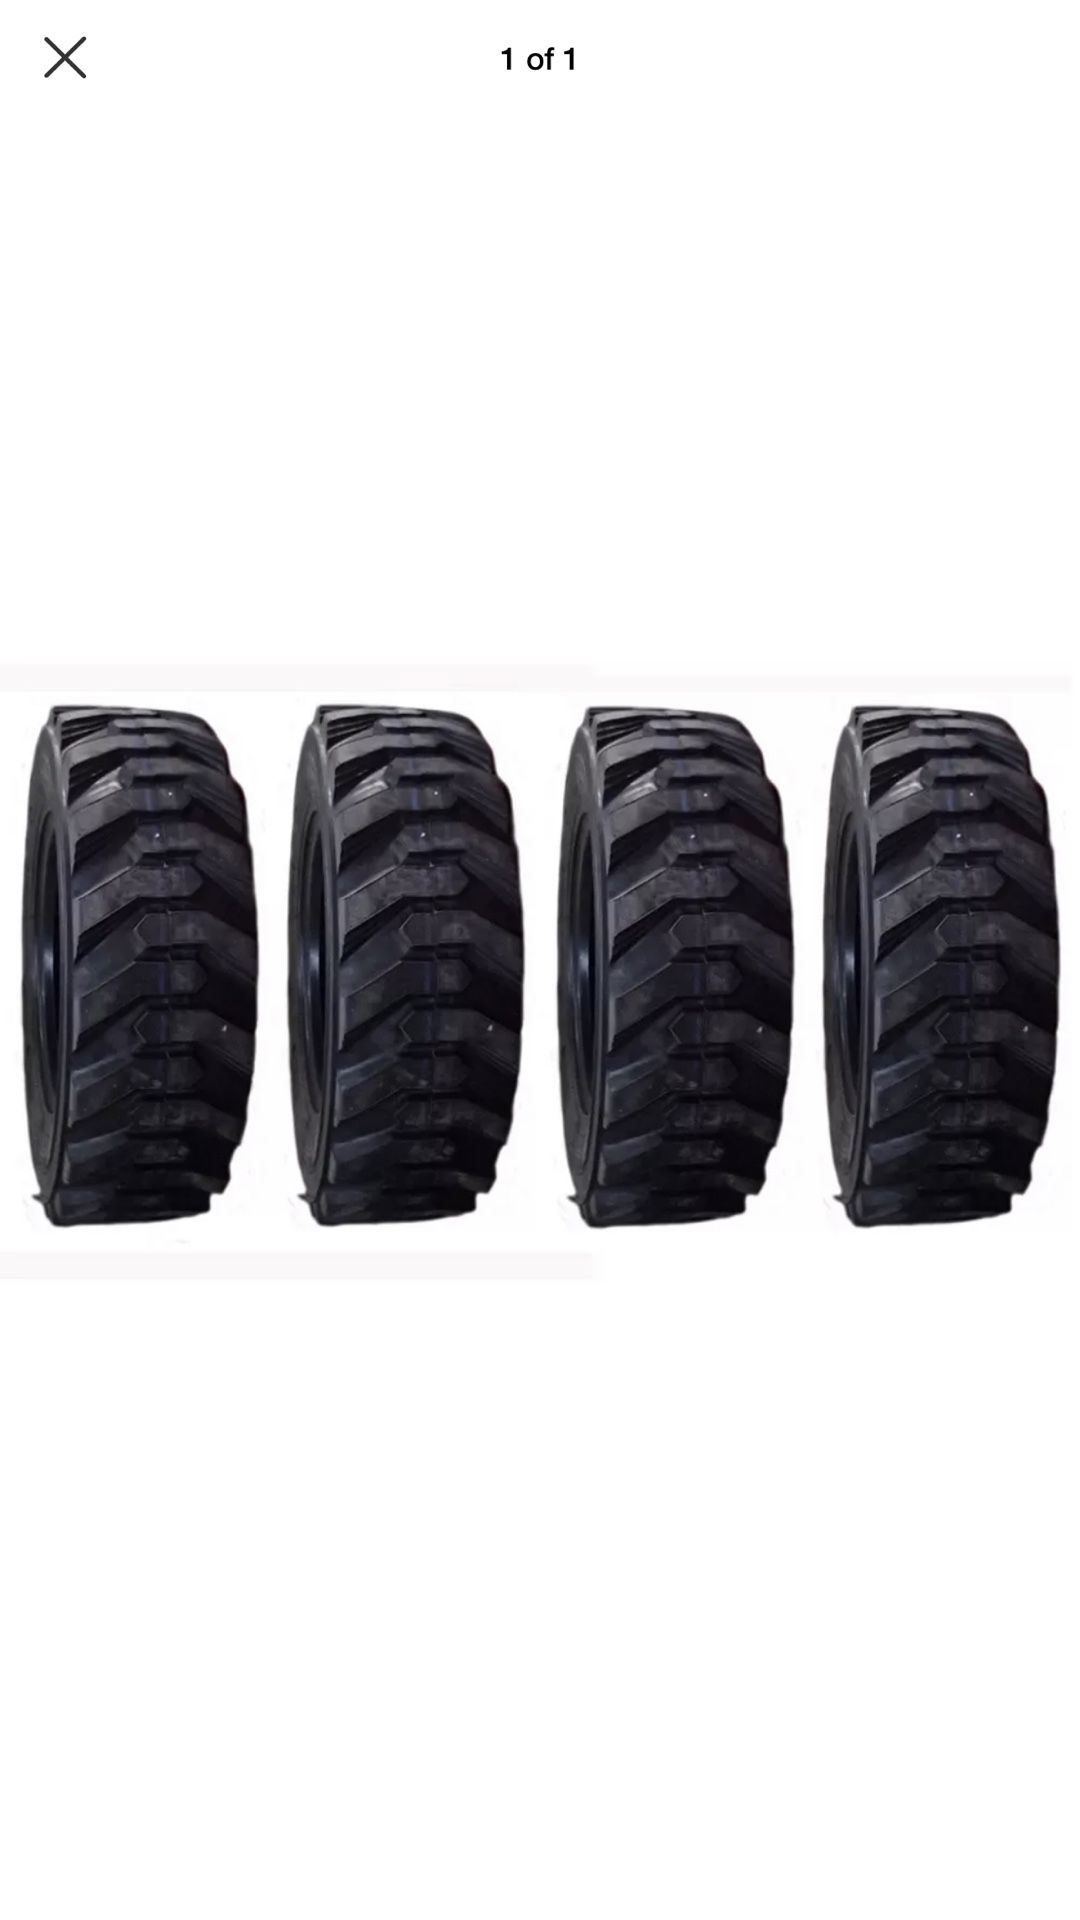 4x Skid steer tire 12x 16.5 14ply $520 no lowball